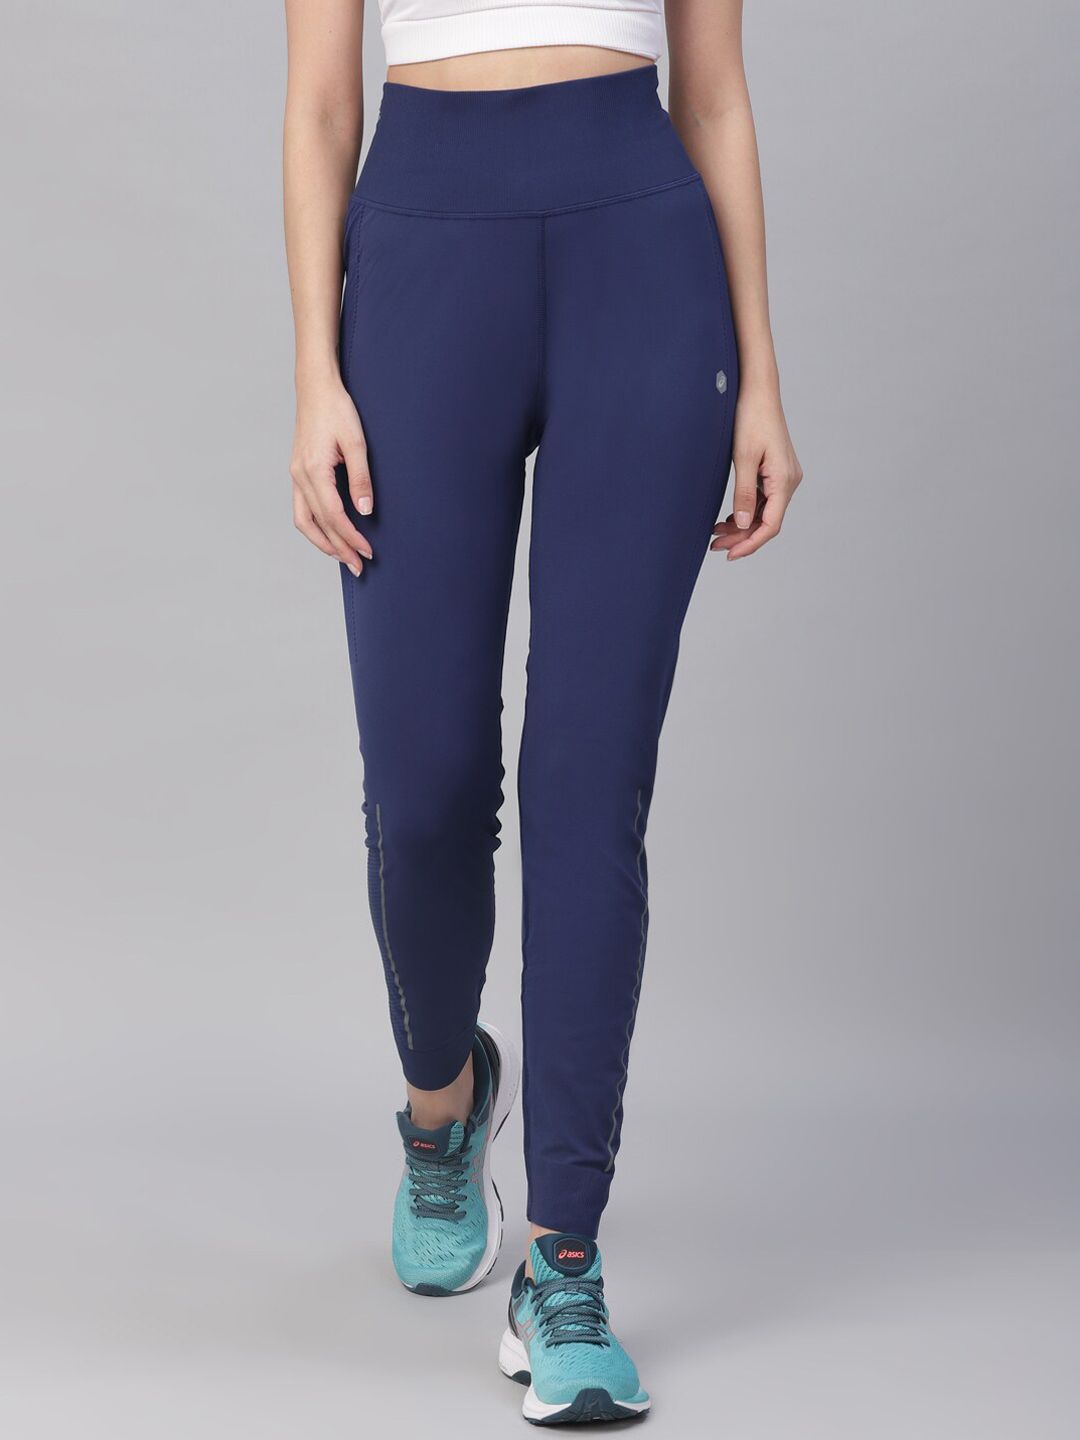 ASICS Women Blue Solid Knit Track Pants Price in India